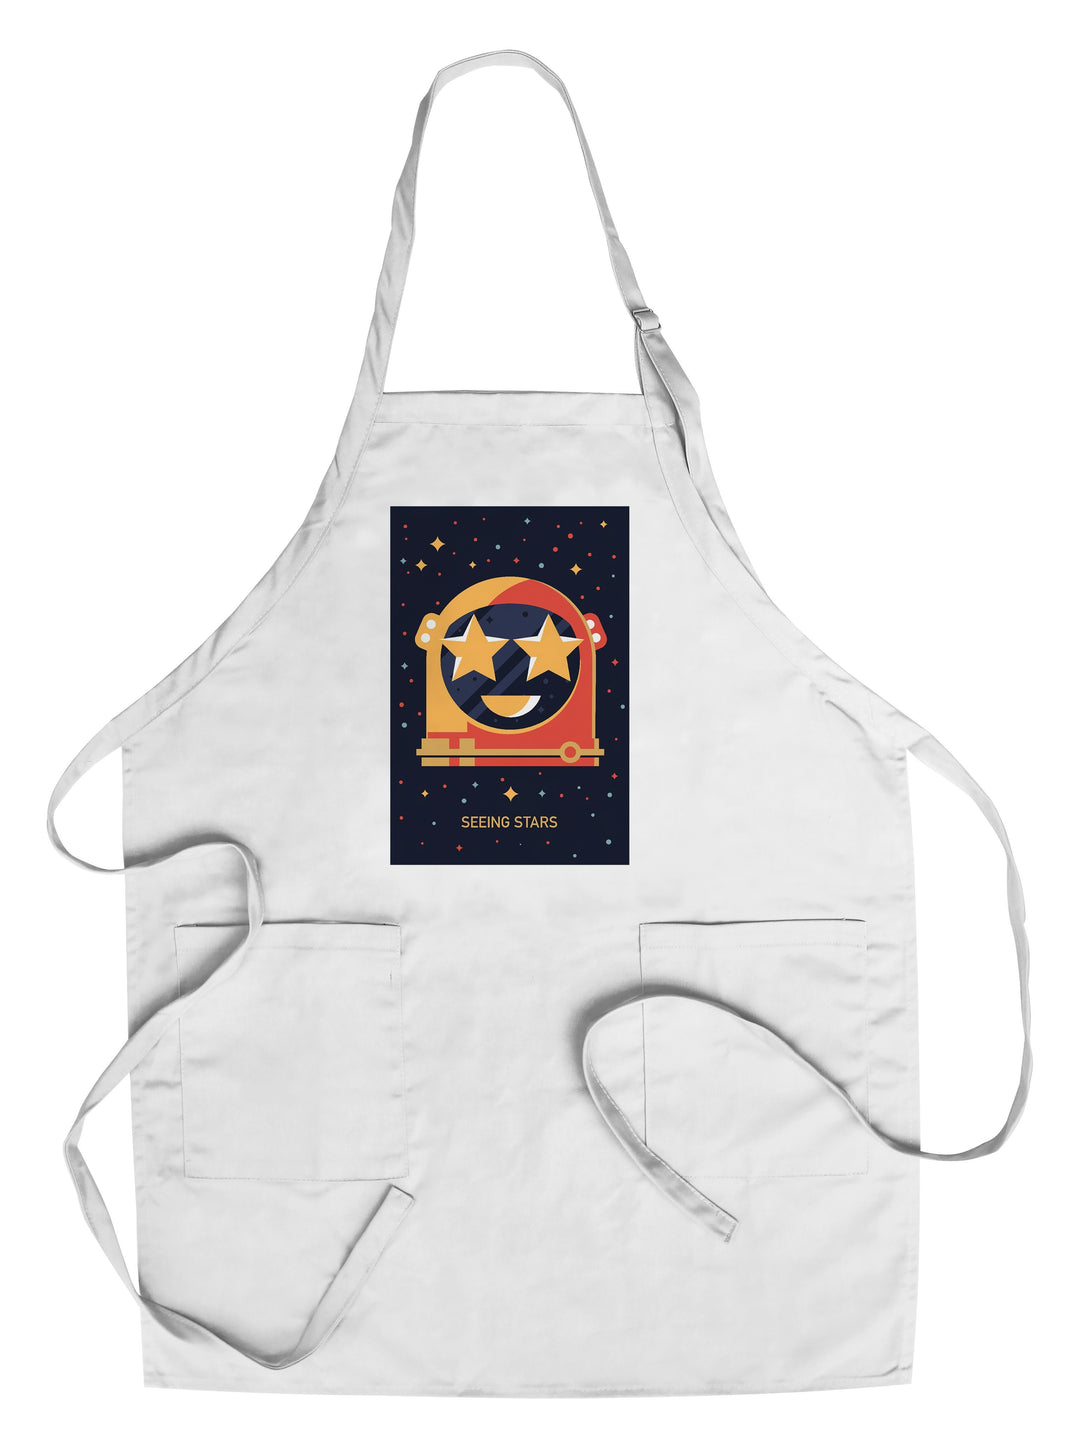 Equations and Emojis Collection, Astronaut Helmet, Seeing Stars, Towels and Aprons Kitchen Lantern Press Chef's Apron 